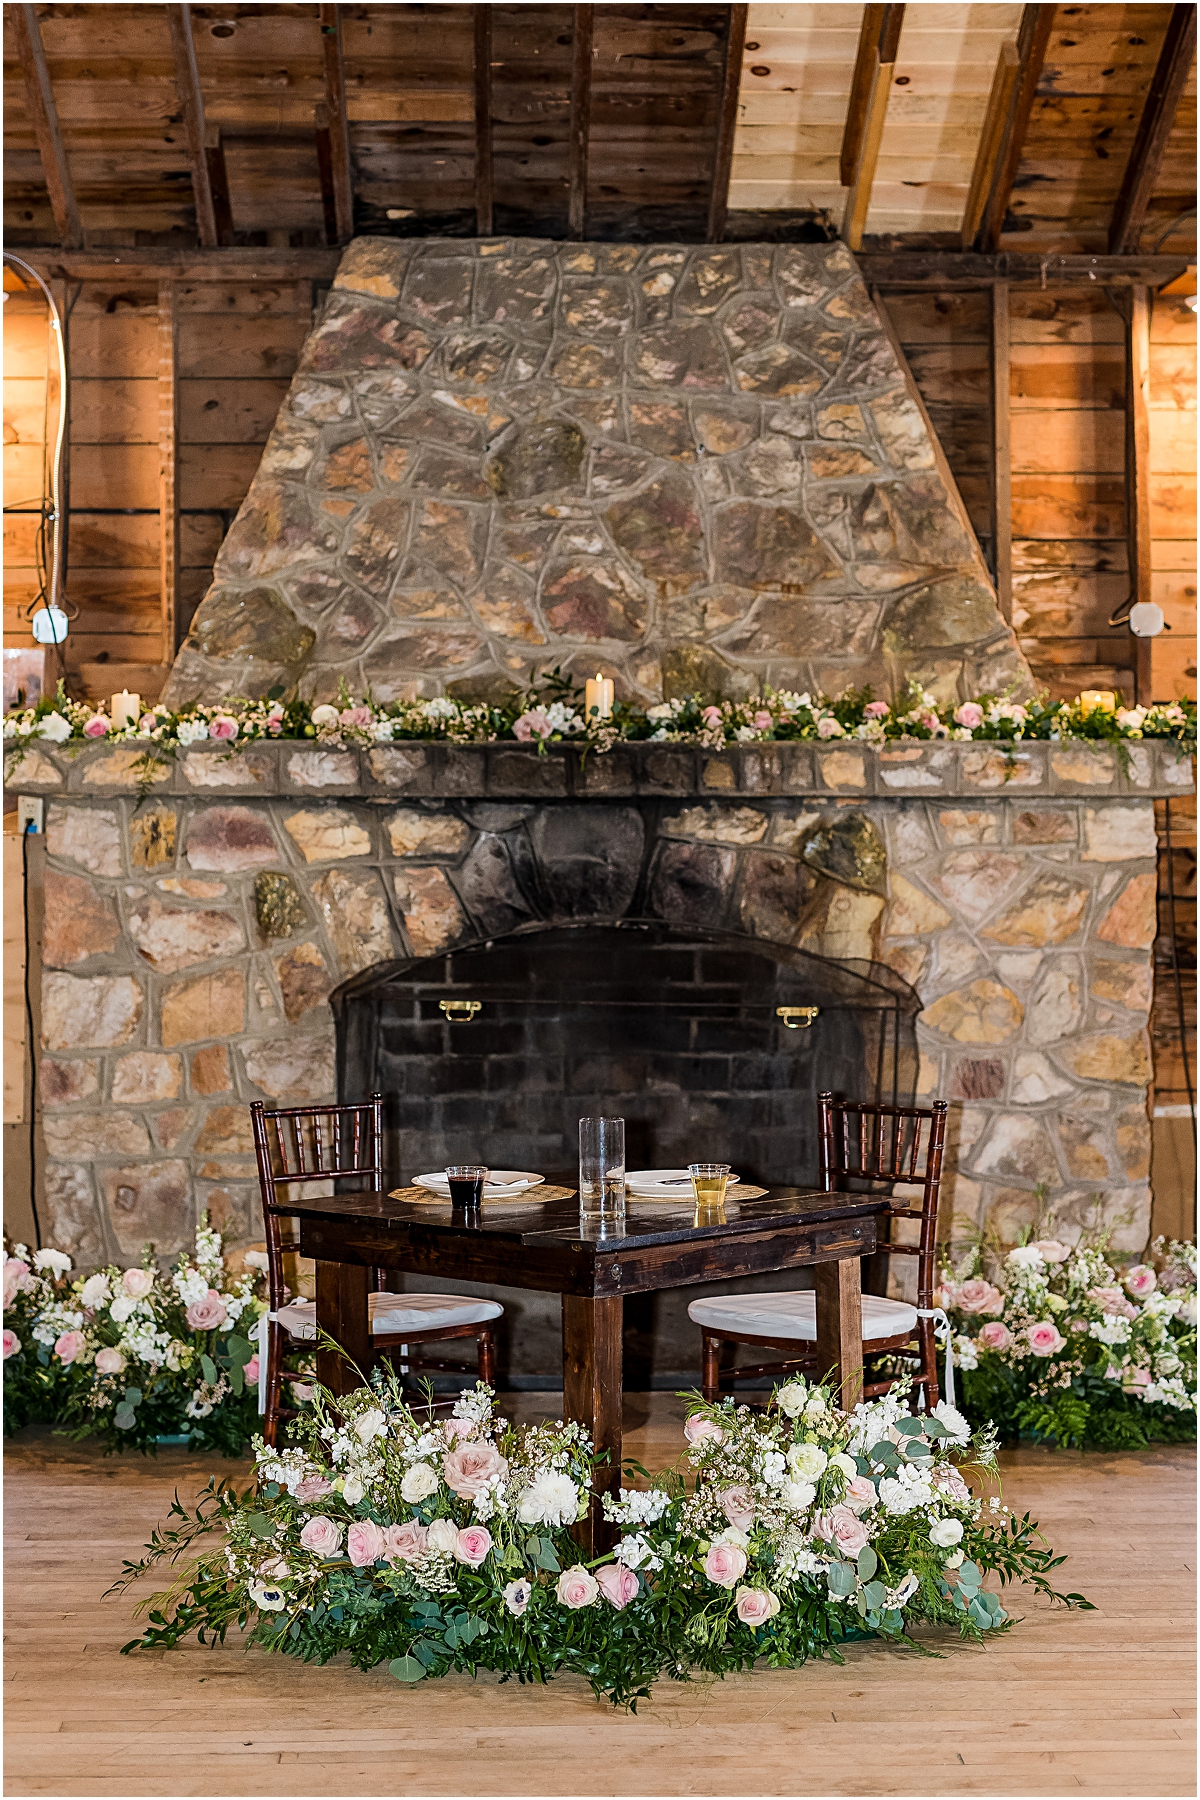 Detail photo of table in front of fireplace